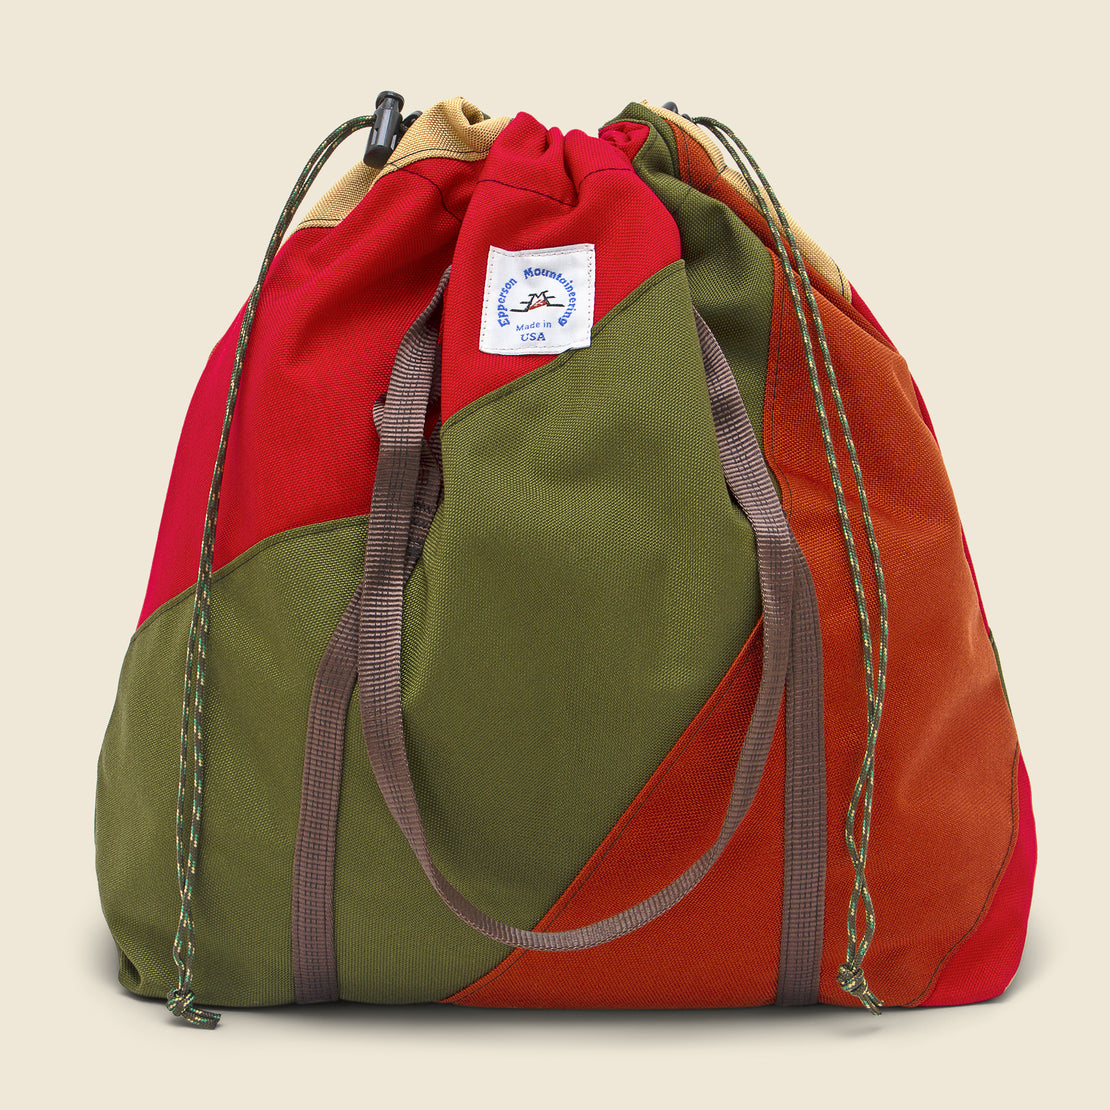 Leisure Tote - Crazy 2 - Epperson Mountaineering - STAG Provisions - Accessories - Bags / Luggage